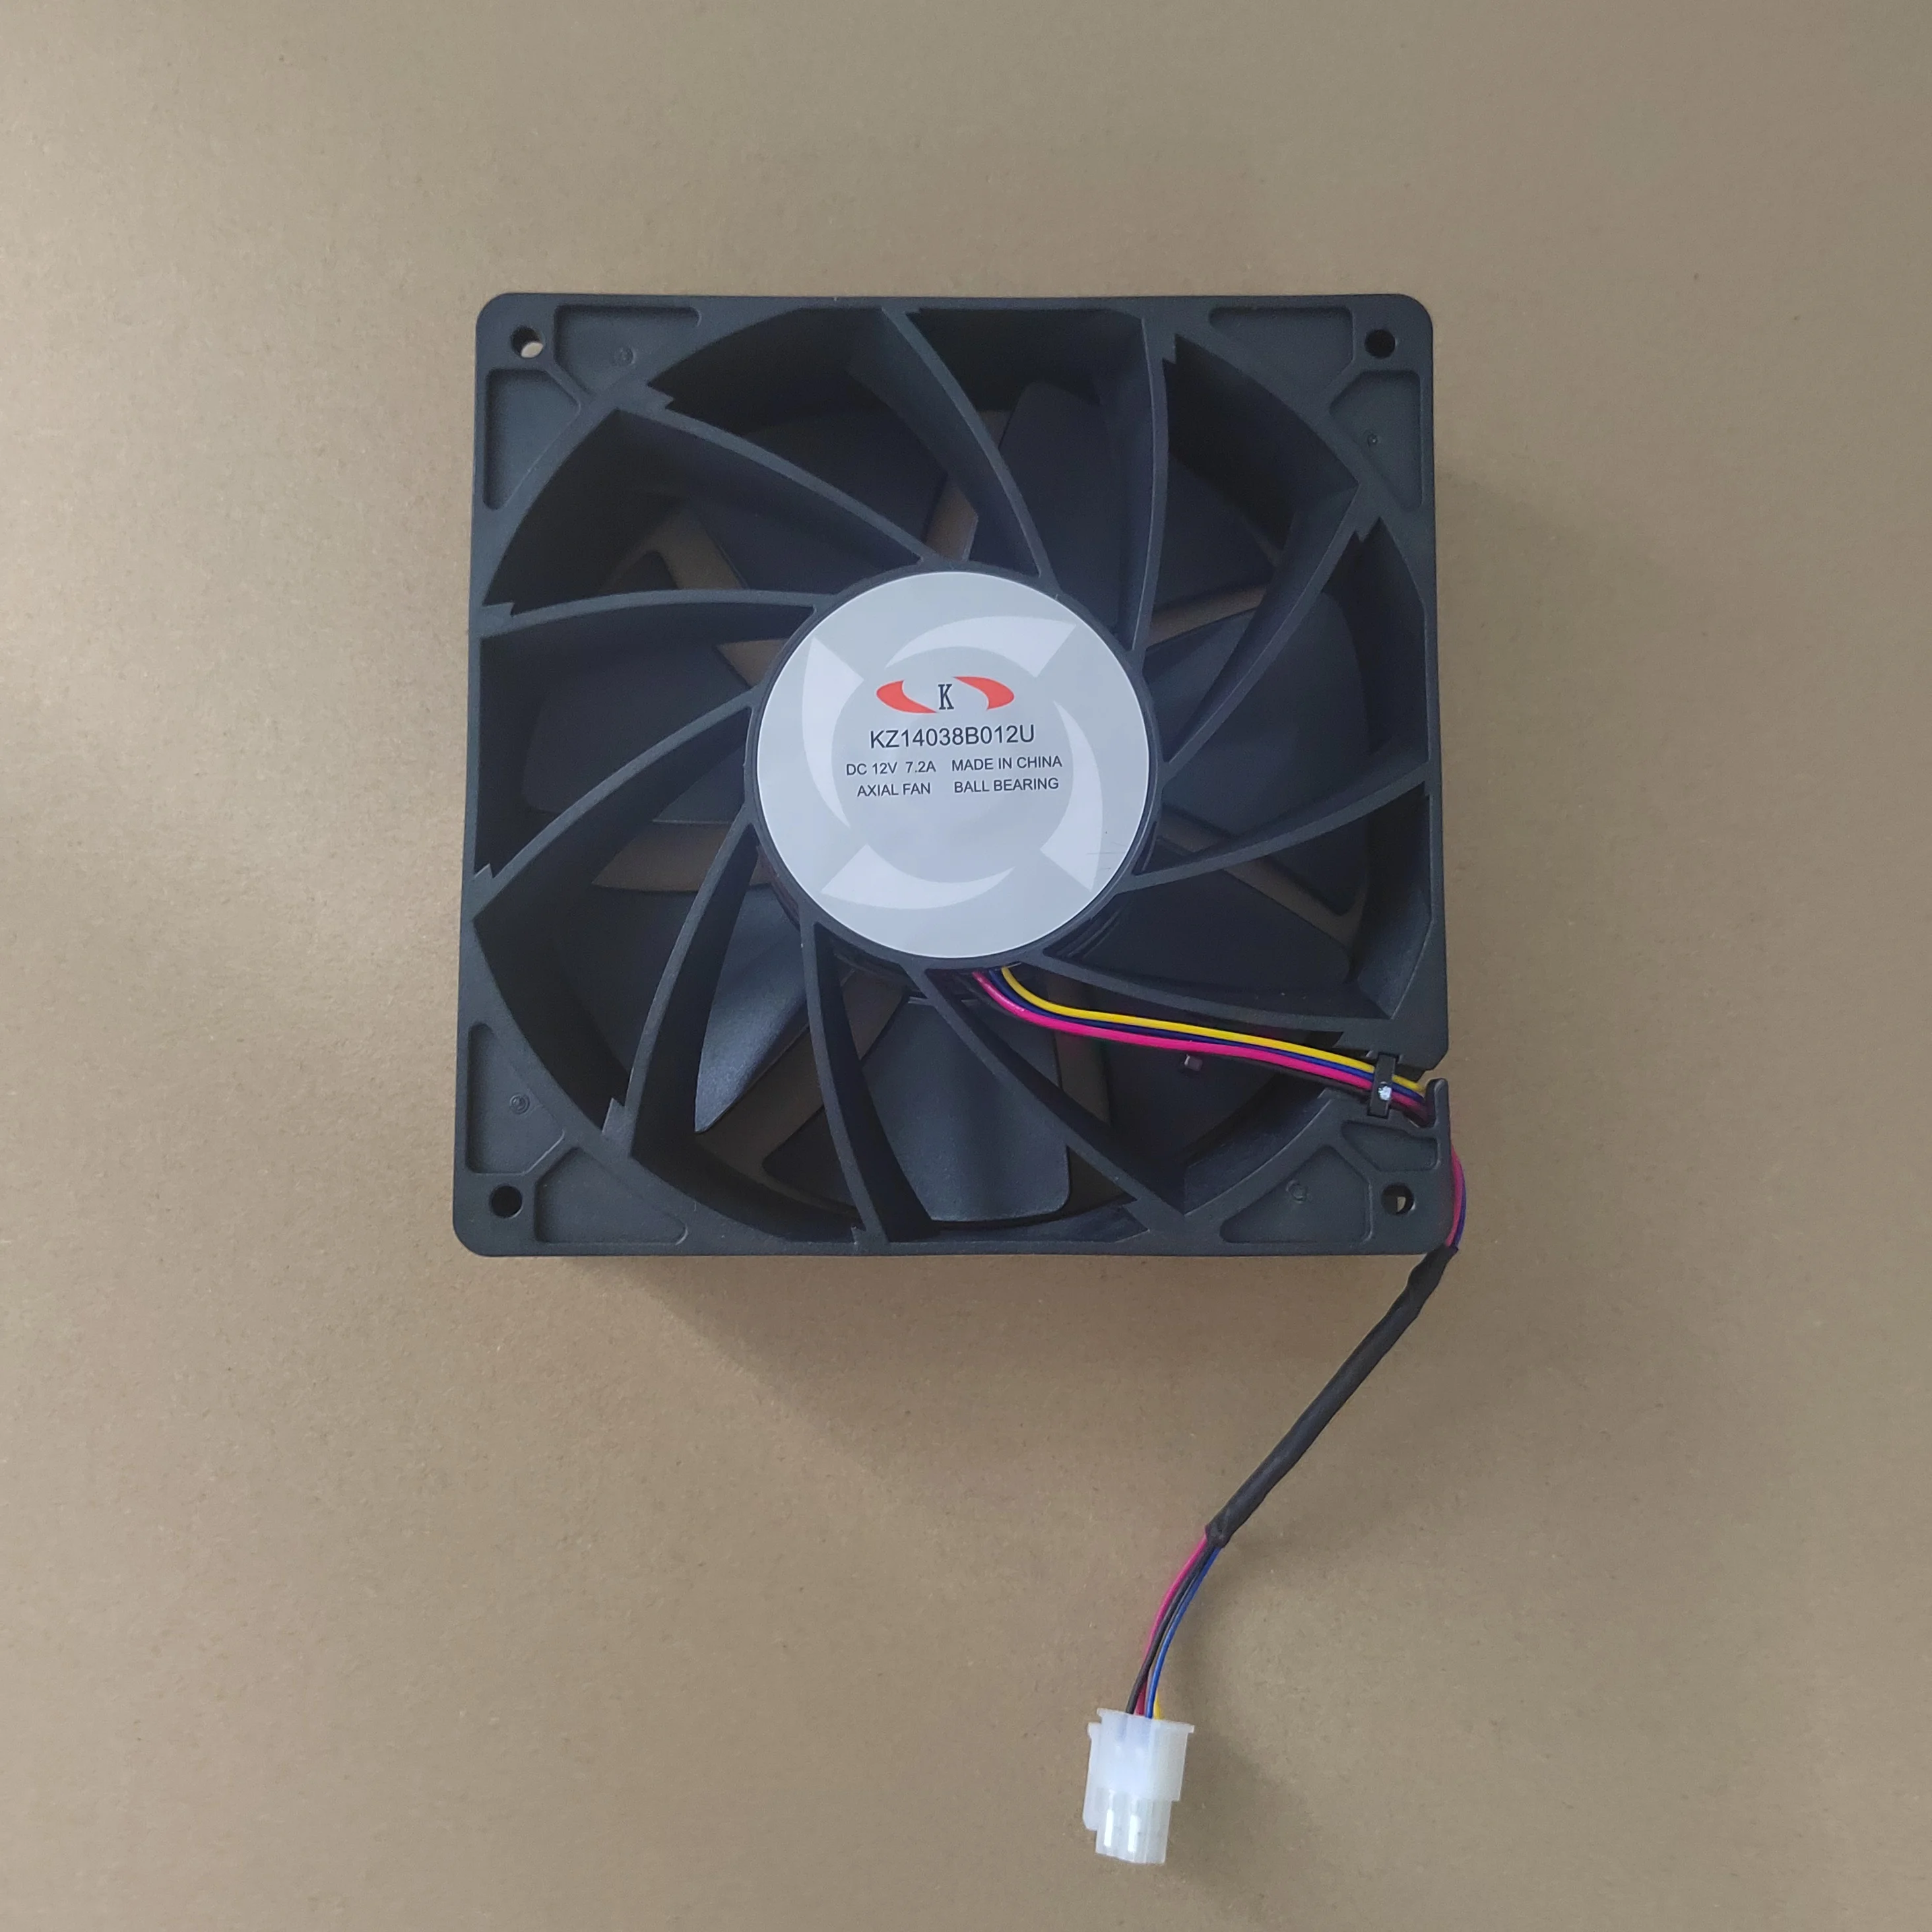 

The new original whatsminer cooler fan 14038 is suitable for m21s m20s m30s m32 m31s++m50